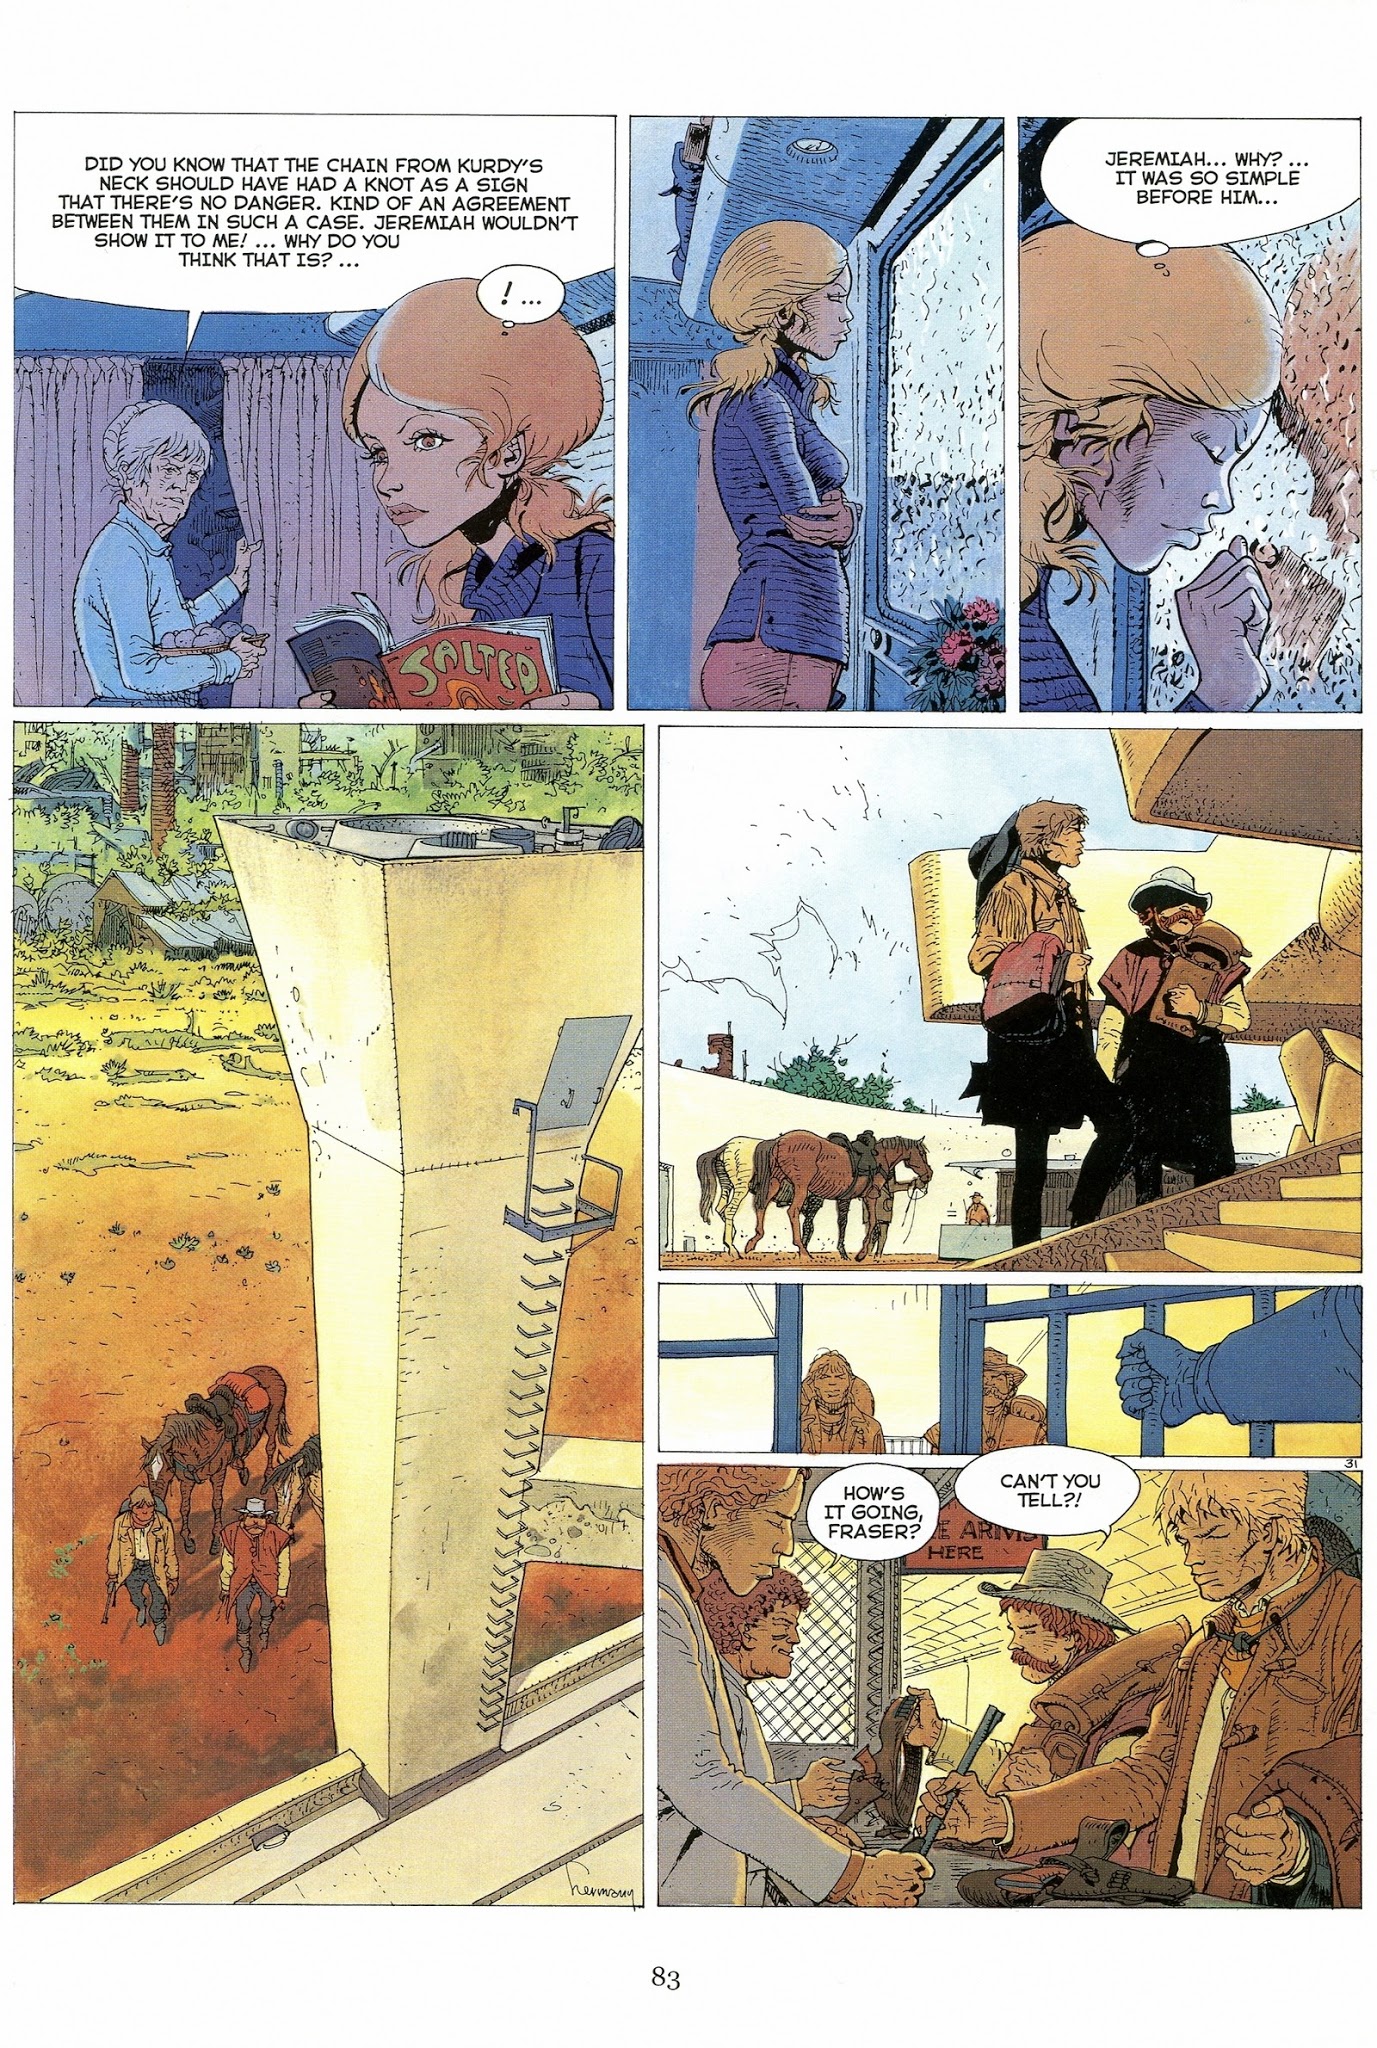 Read online Jeremiah by Hermann comic -  Issue # TPB 2 - 84